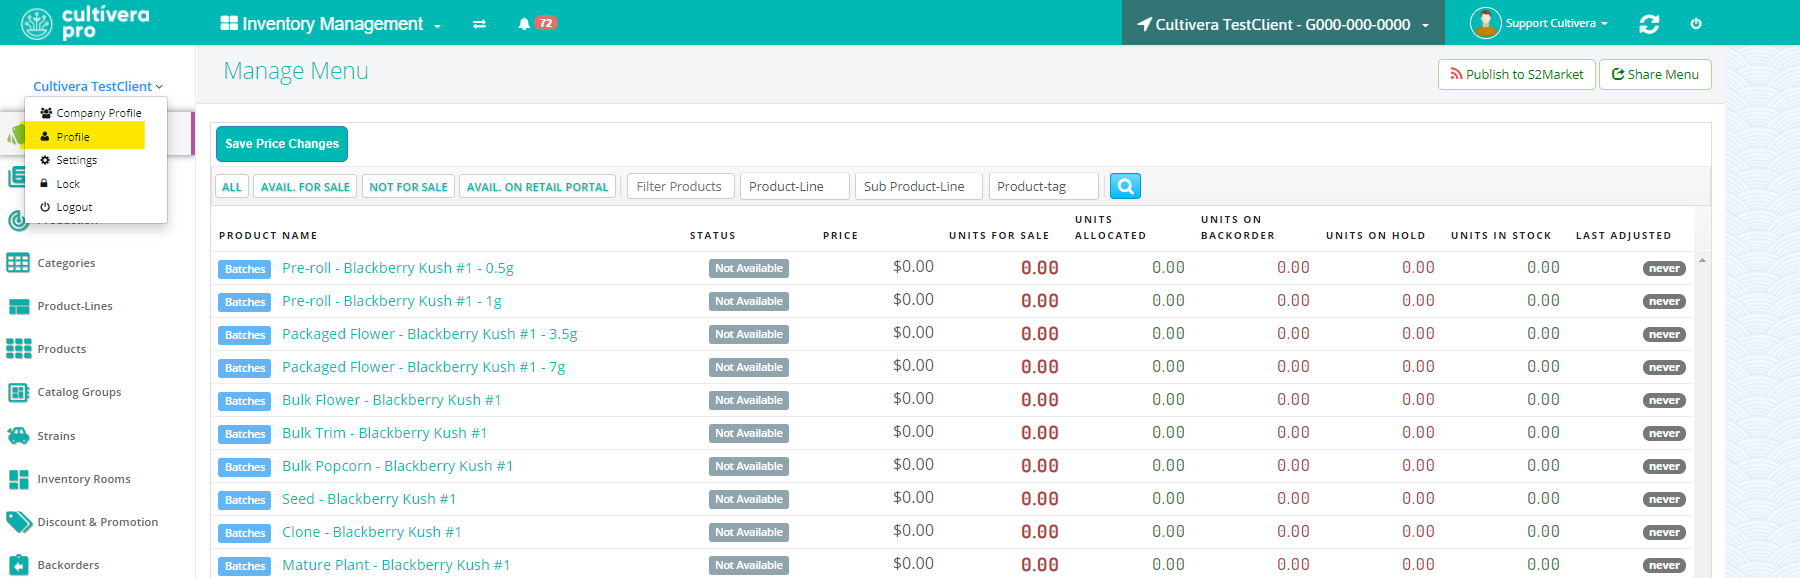 cultivera pro inventory management manage Menu page